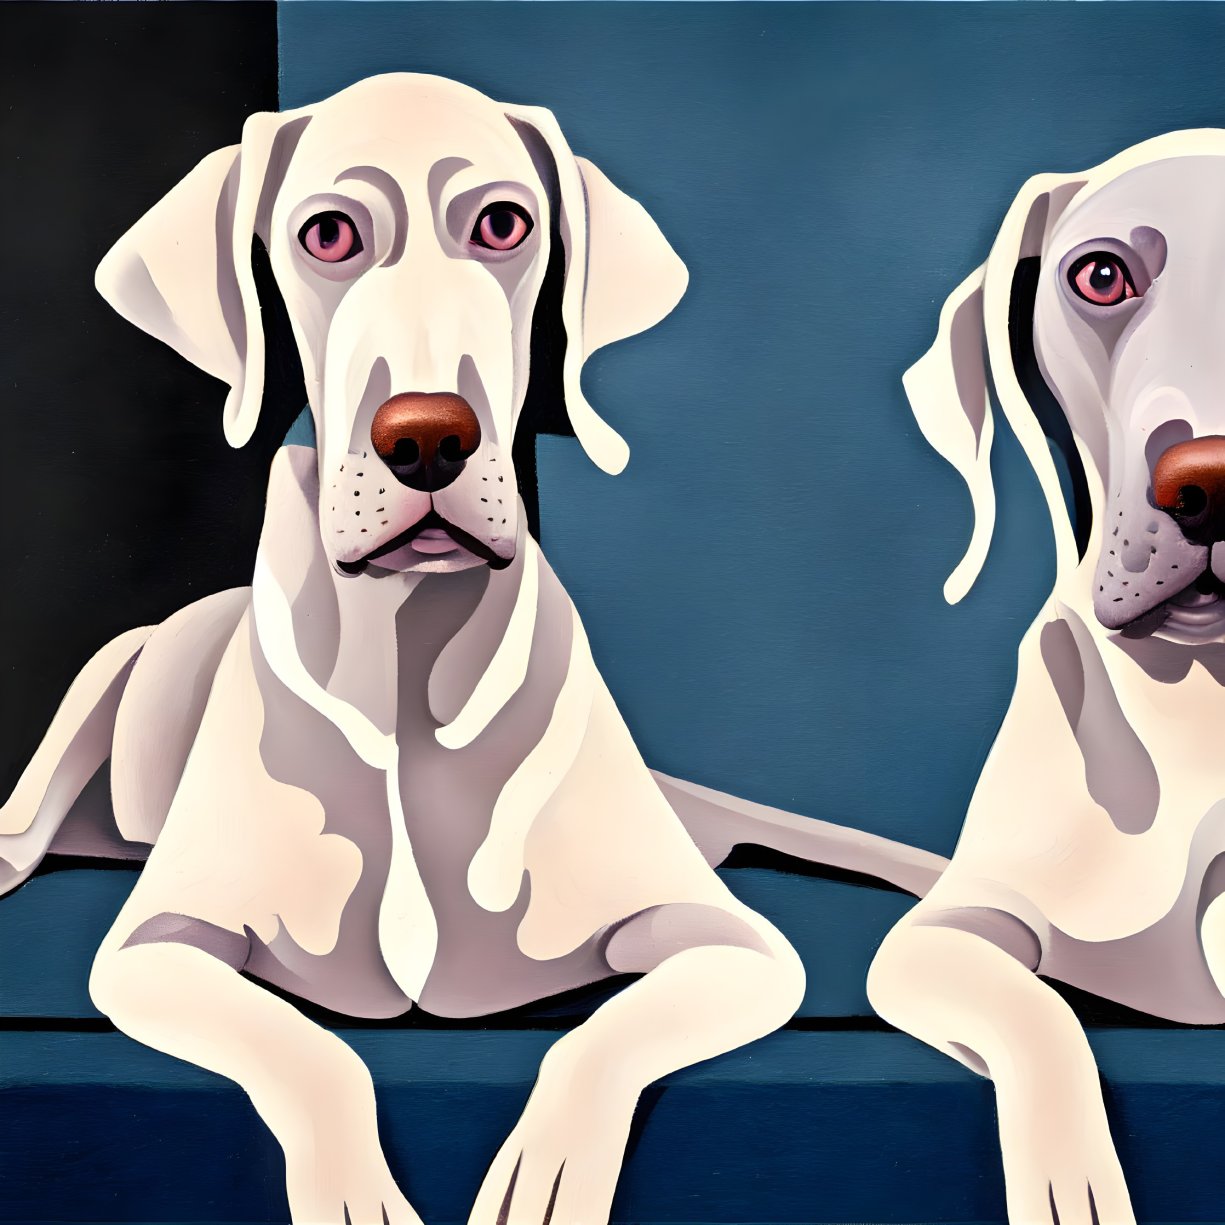 Stylized dogs with prominent eyes in muted colors on dark blue background